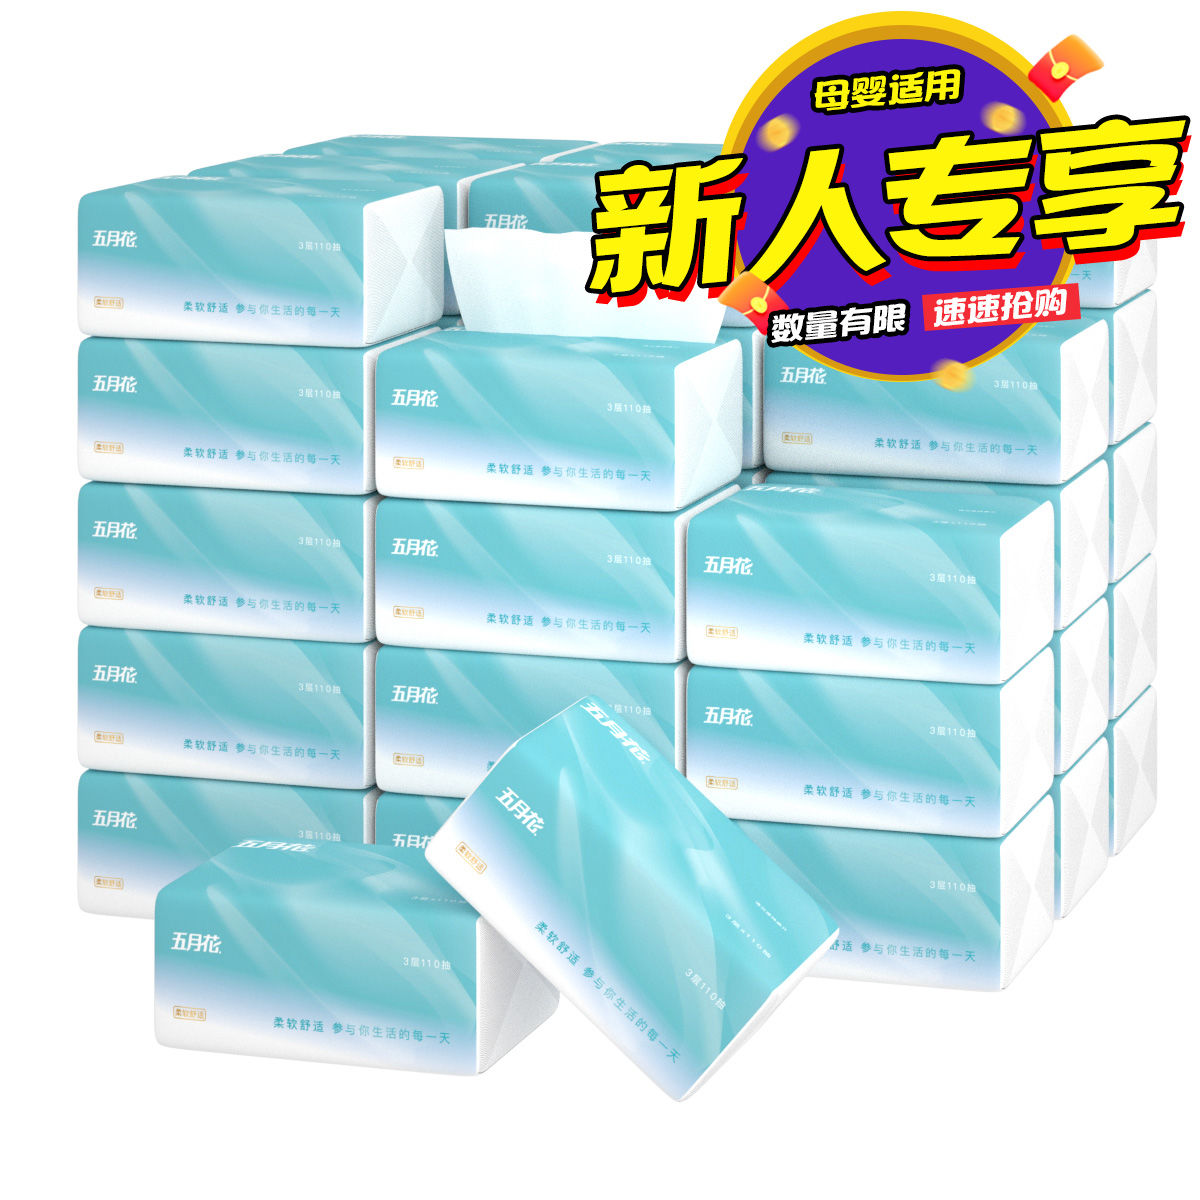 Mayflower 3-layer pumping paper 110 pumping facial tissue paper household napkin paper toilet paper household paper towel women and babies whole box